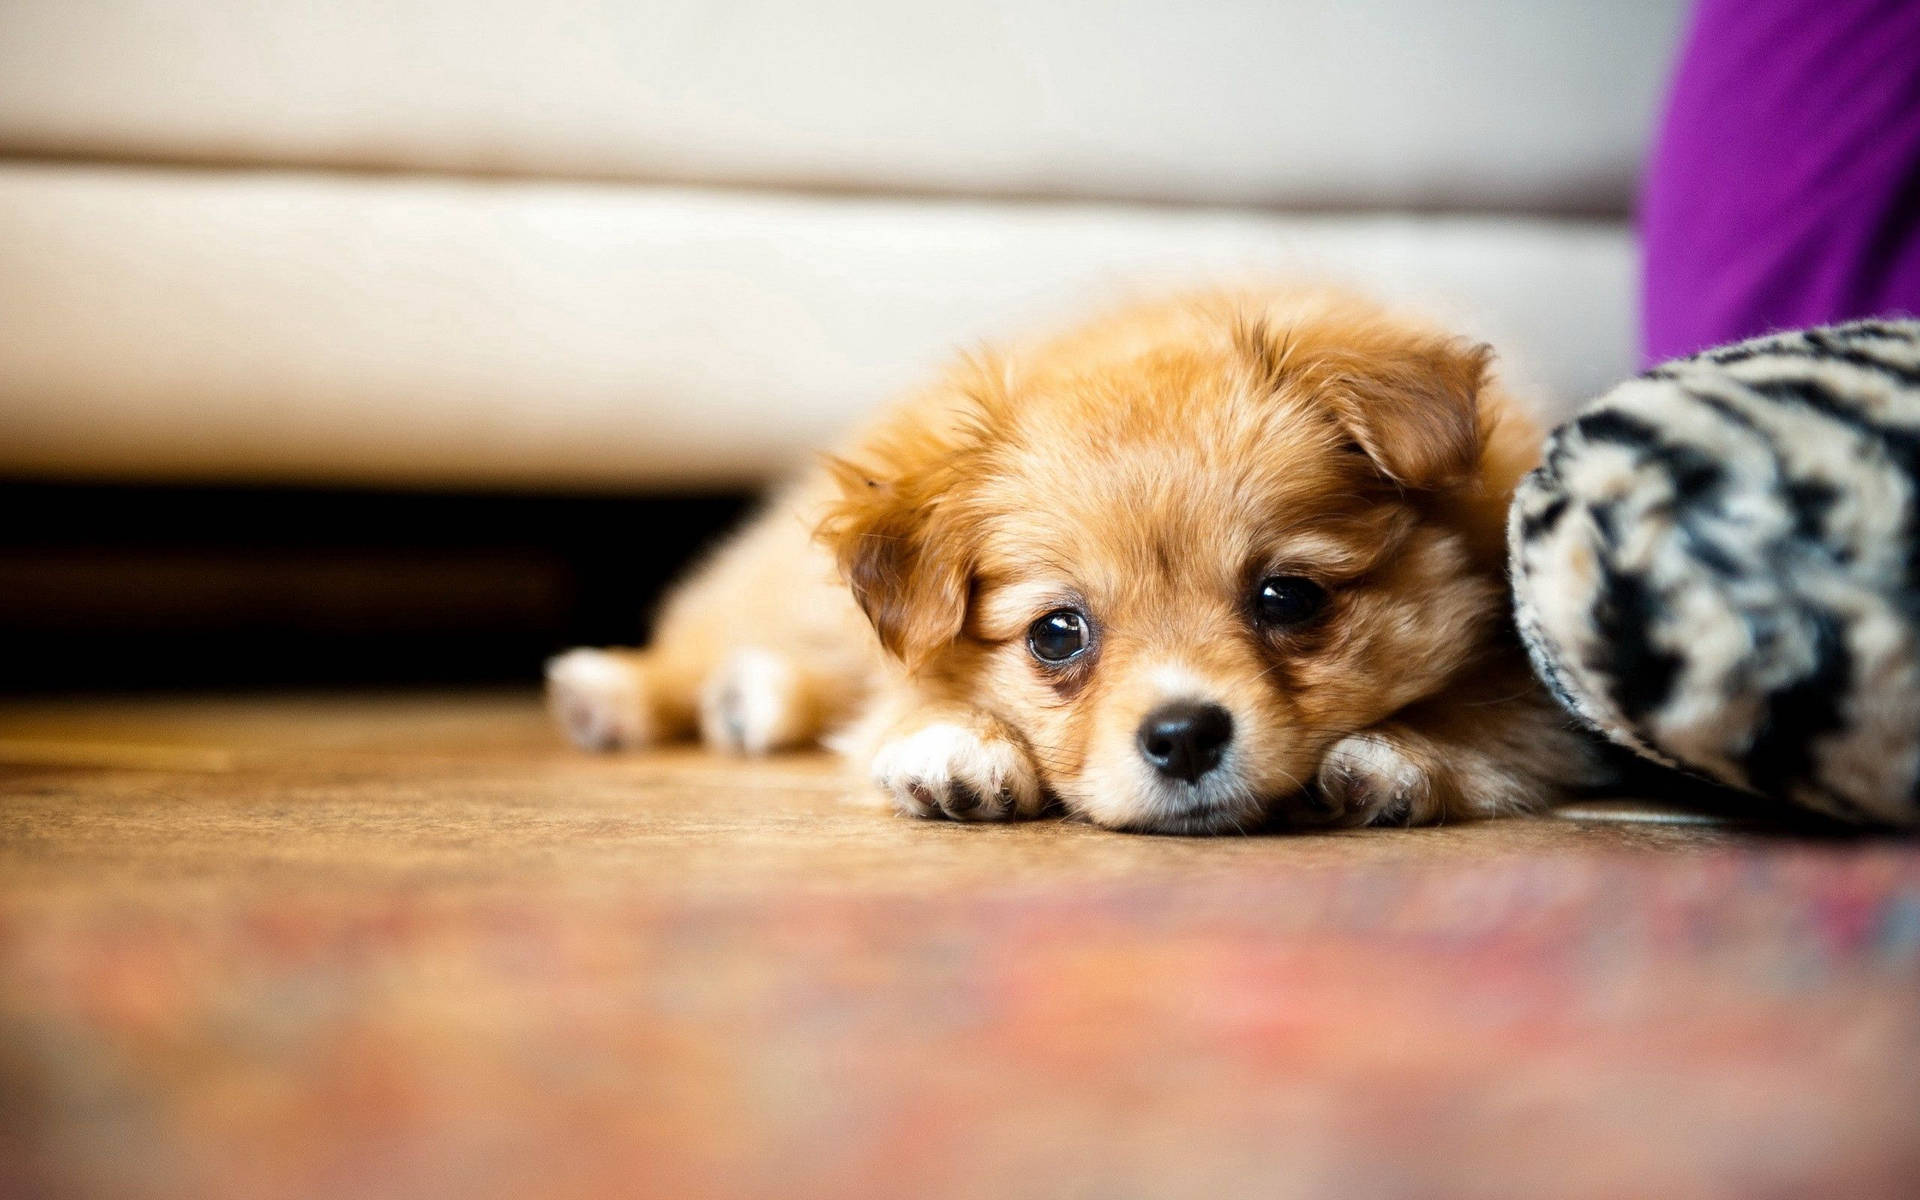 Fluffy Adorable Puppies Wallpapers